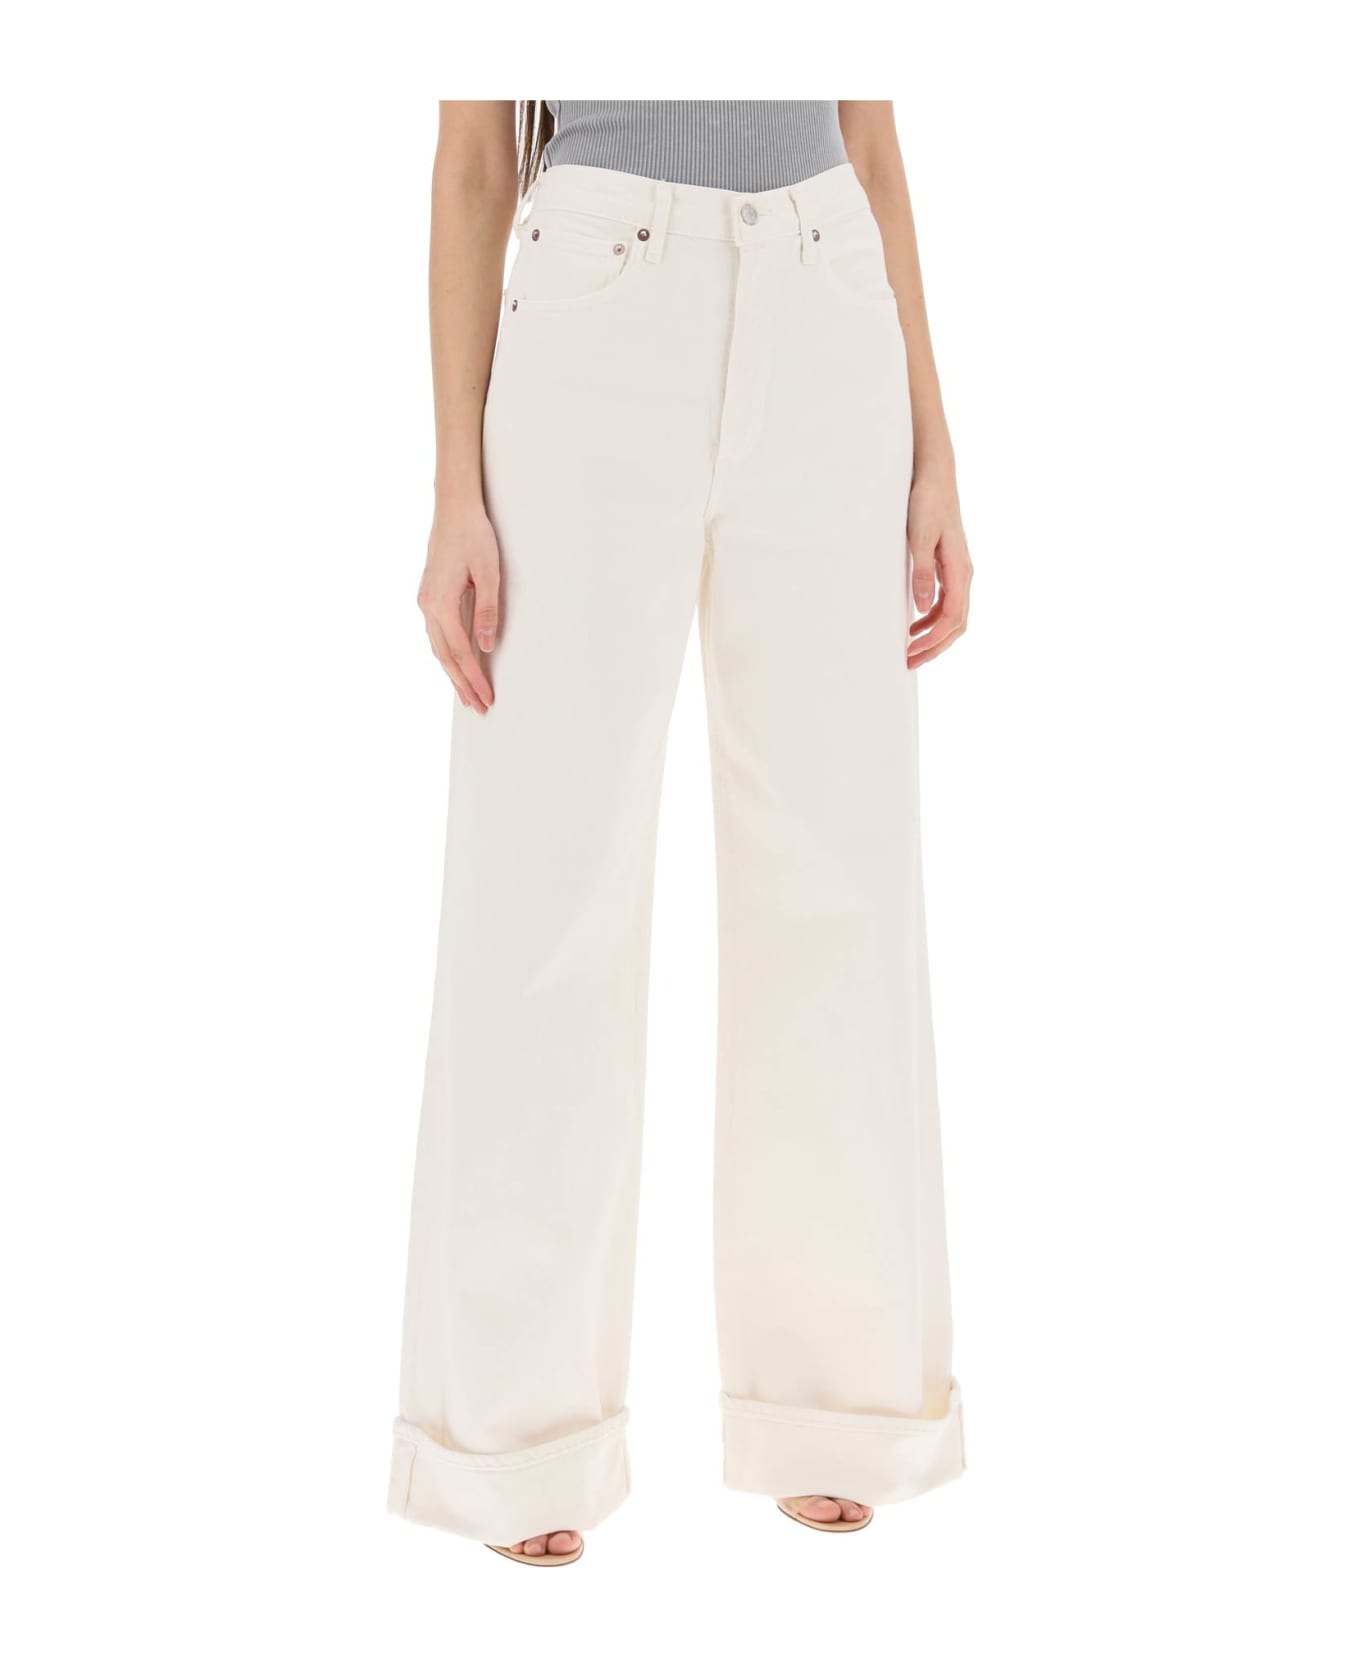 AGOLDE Dame Wide Leg Jeans - FORTUNE COOKIE (White)